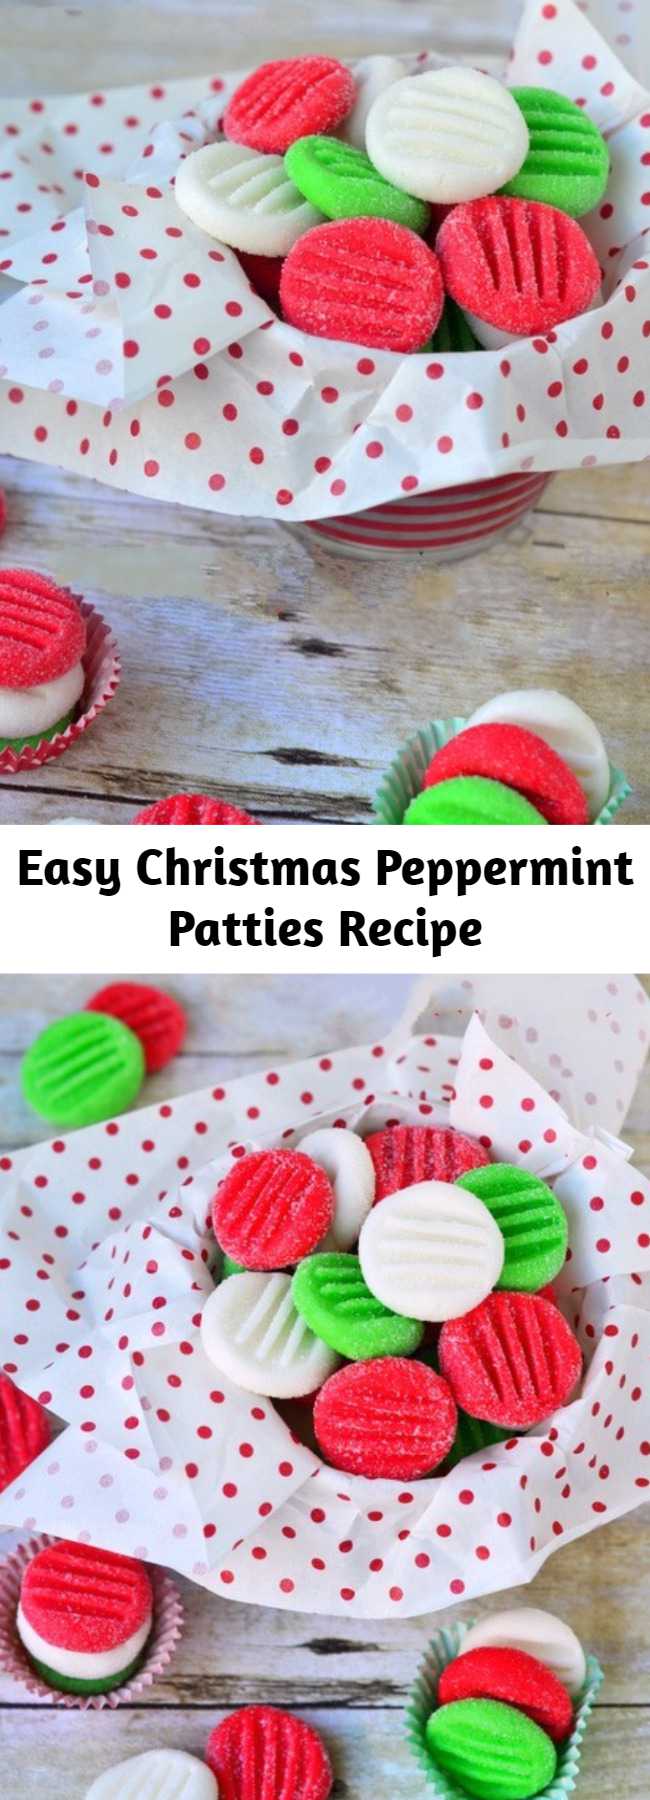 Easy Christmas Peppermint Patties Recipe - You're going to love this Easy Christmas Peppermint Patties recipe! Super easy to make, fantastically festive, and always a hit with kids and adults alike. These holiday treats are the perfect addition to cookie trays and make an excellent gift!